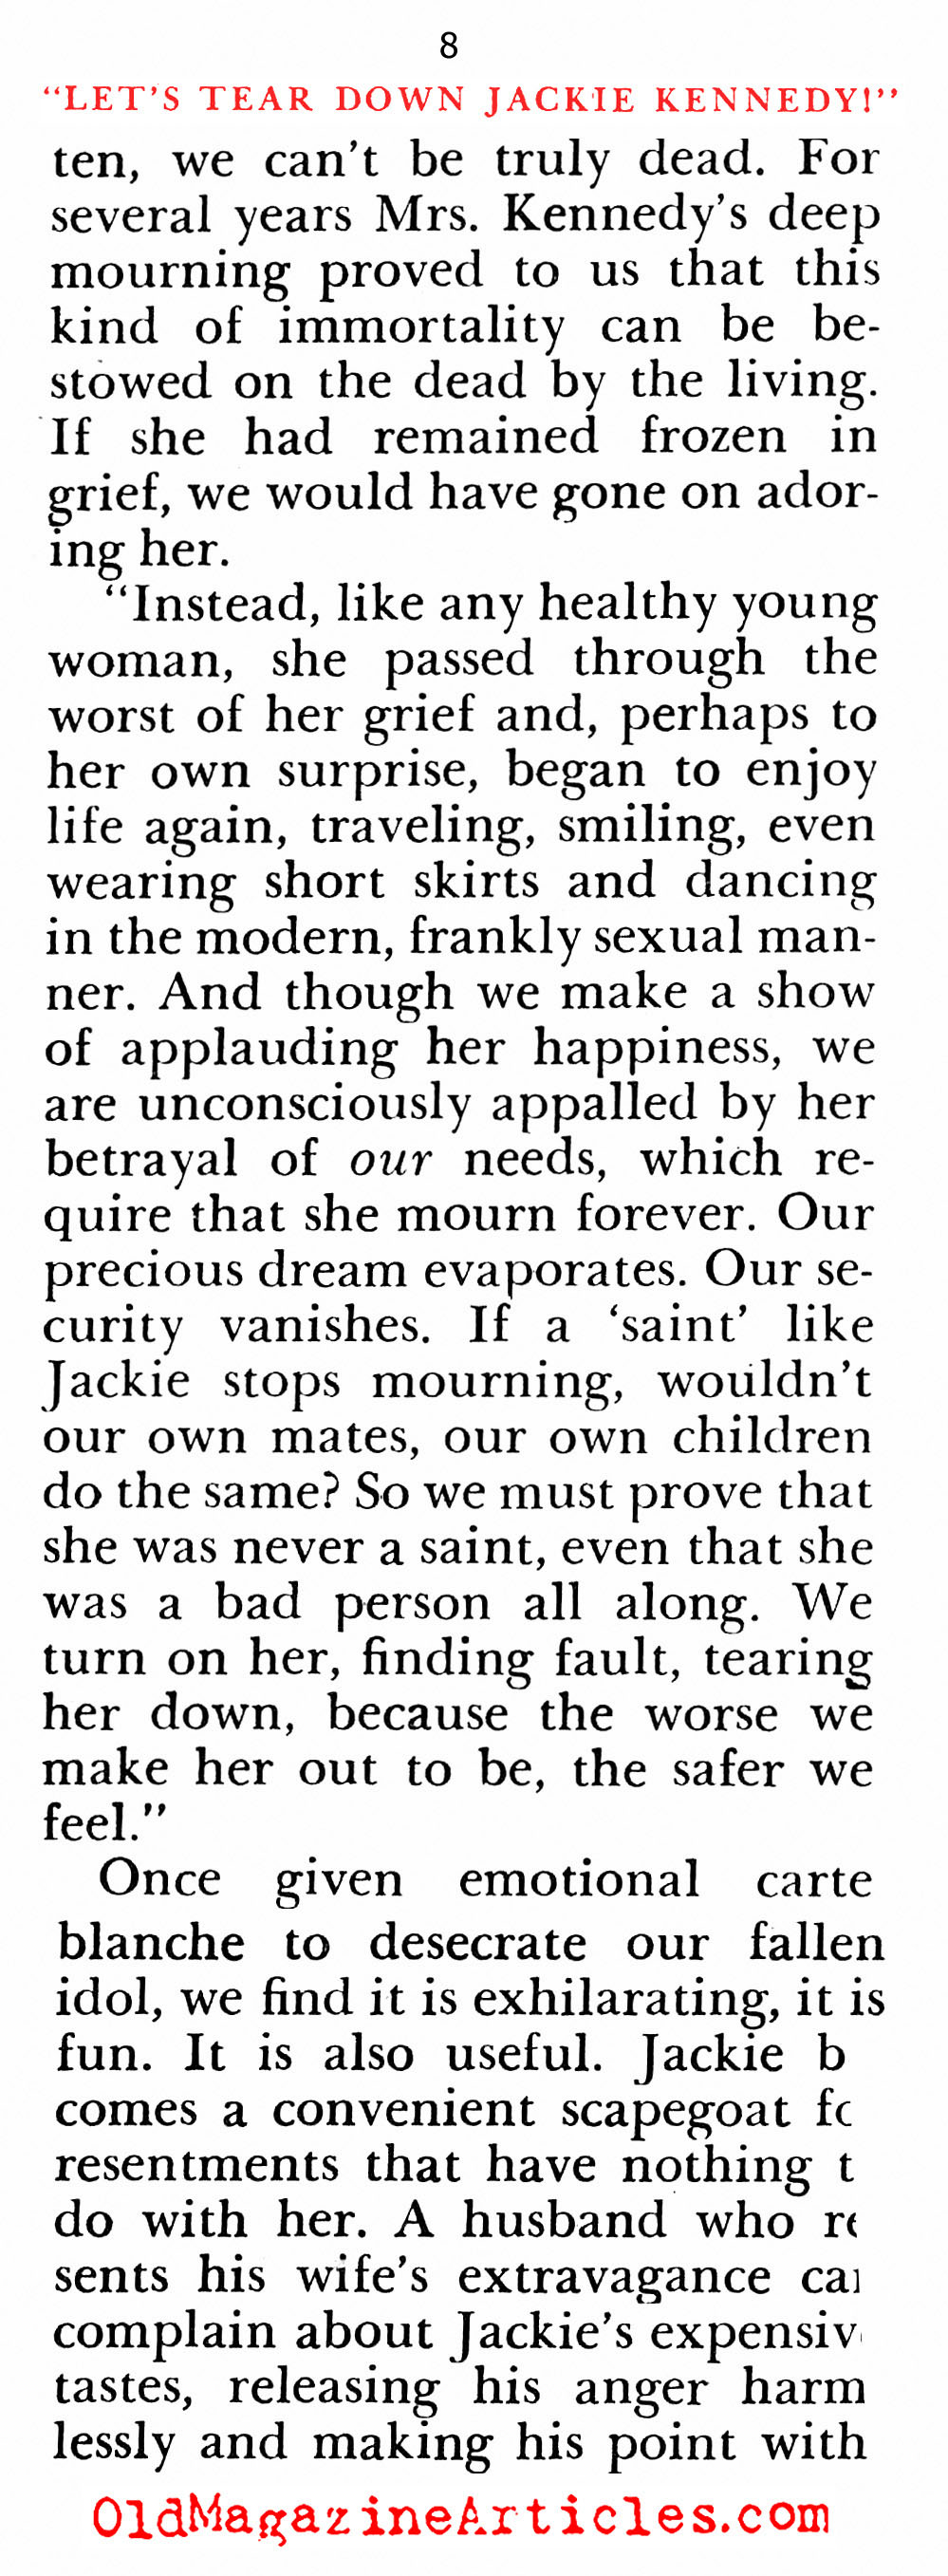 Hating Jackie Kennedy (Pageant Magazine, 1967)